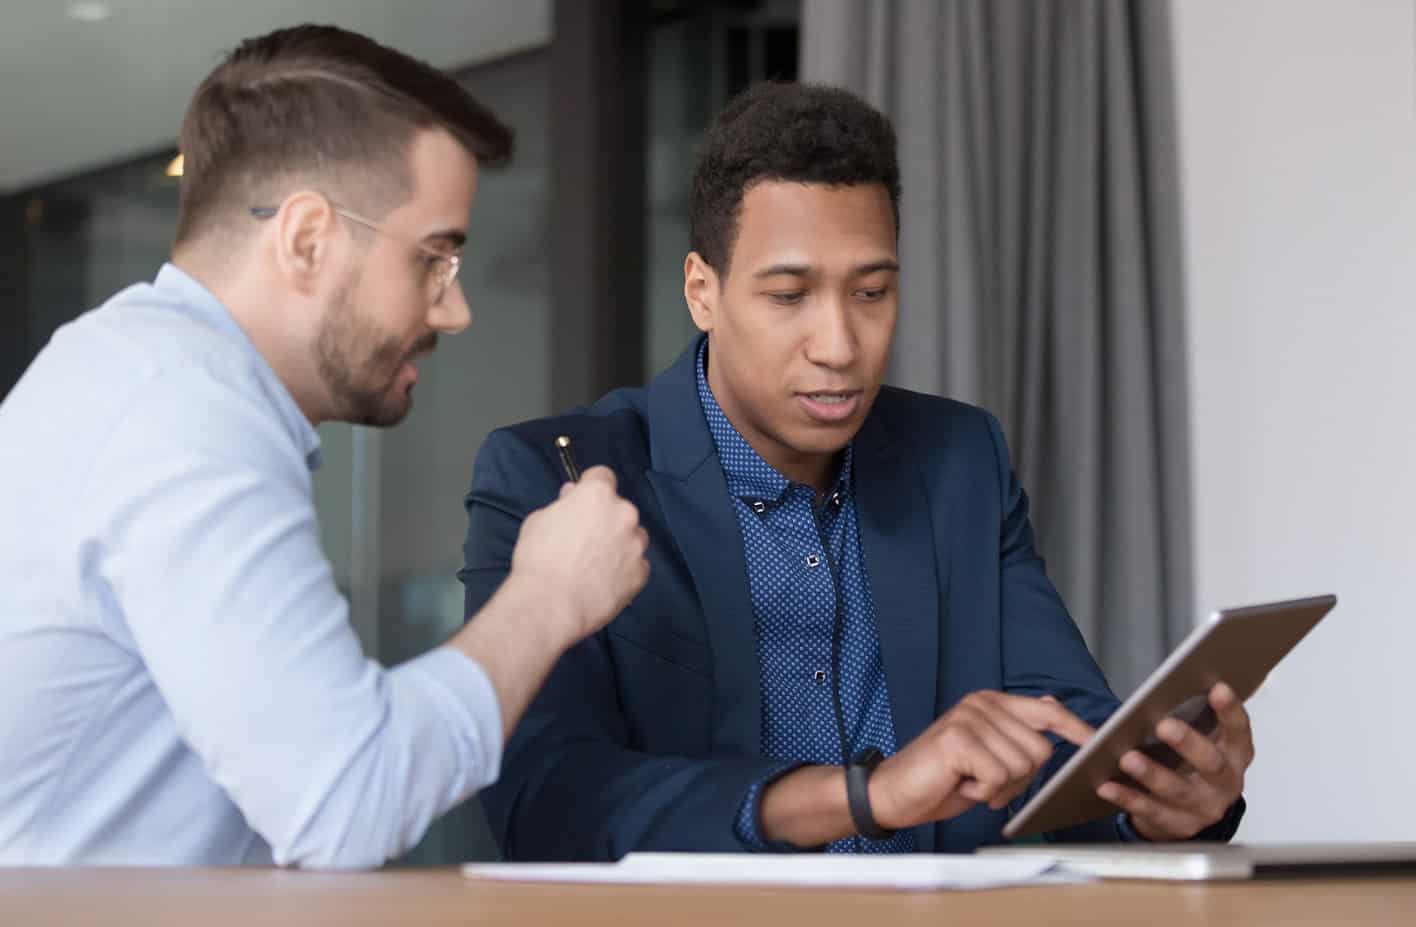 Two business men sitting at table looking at iPad